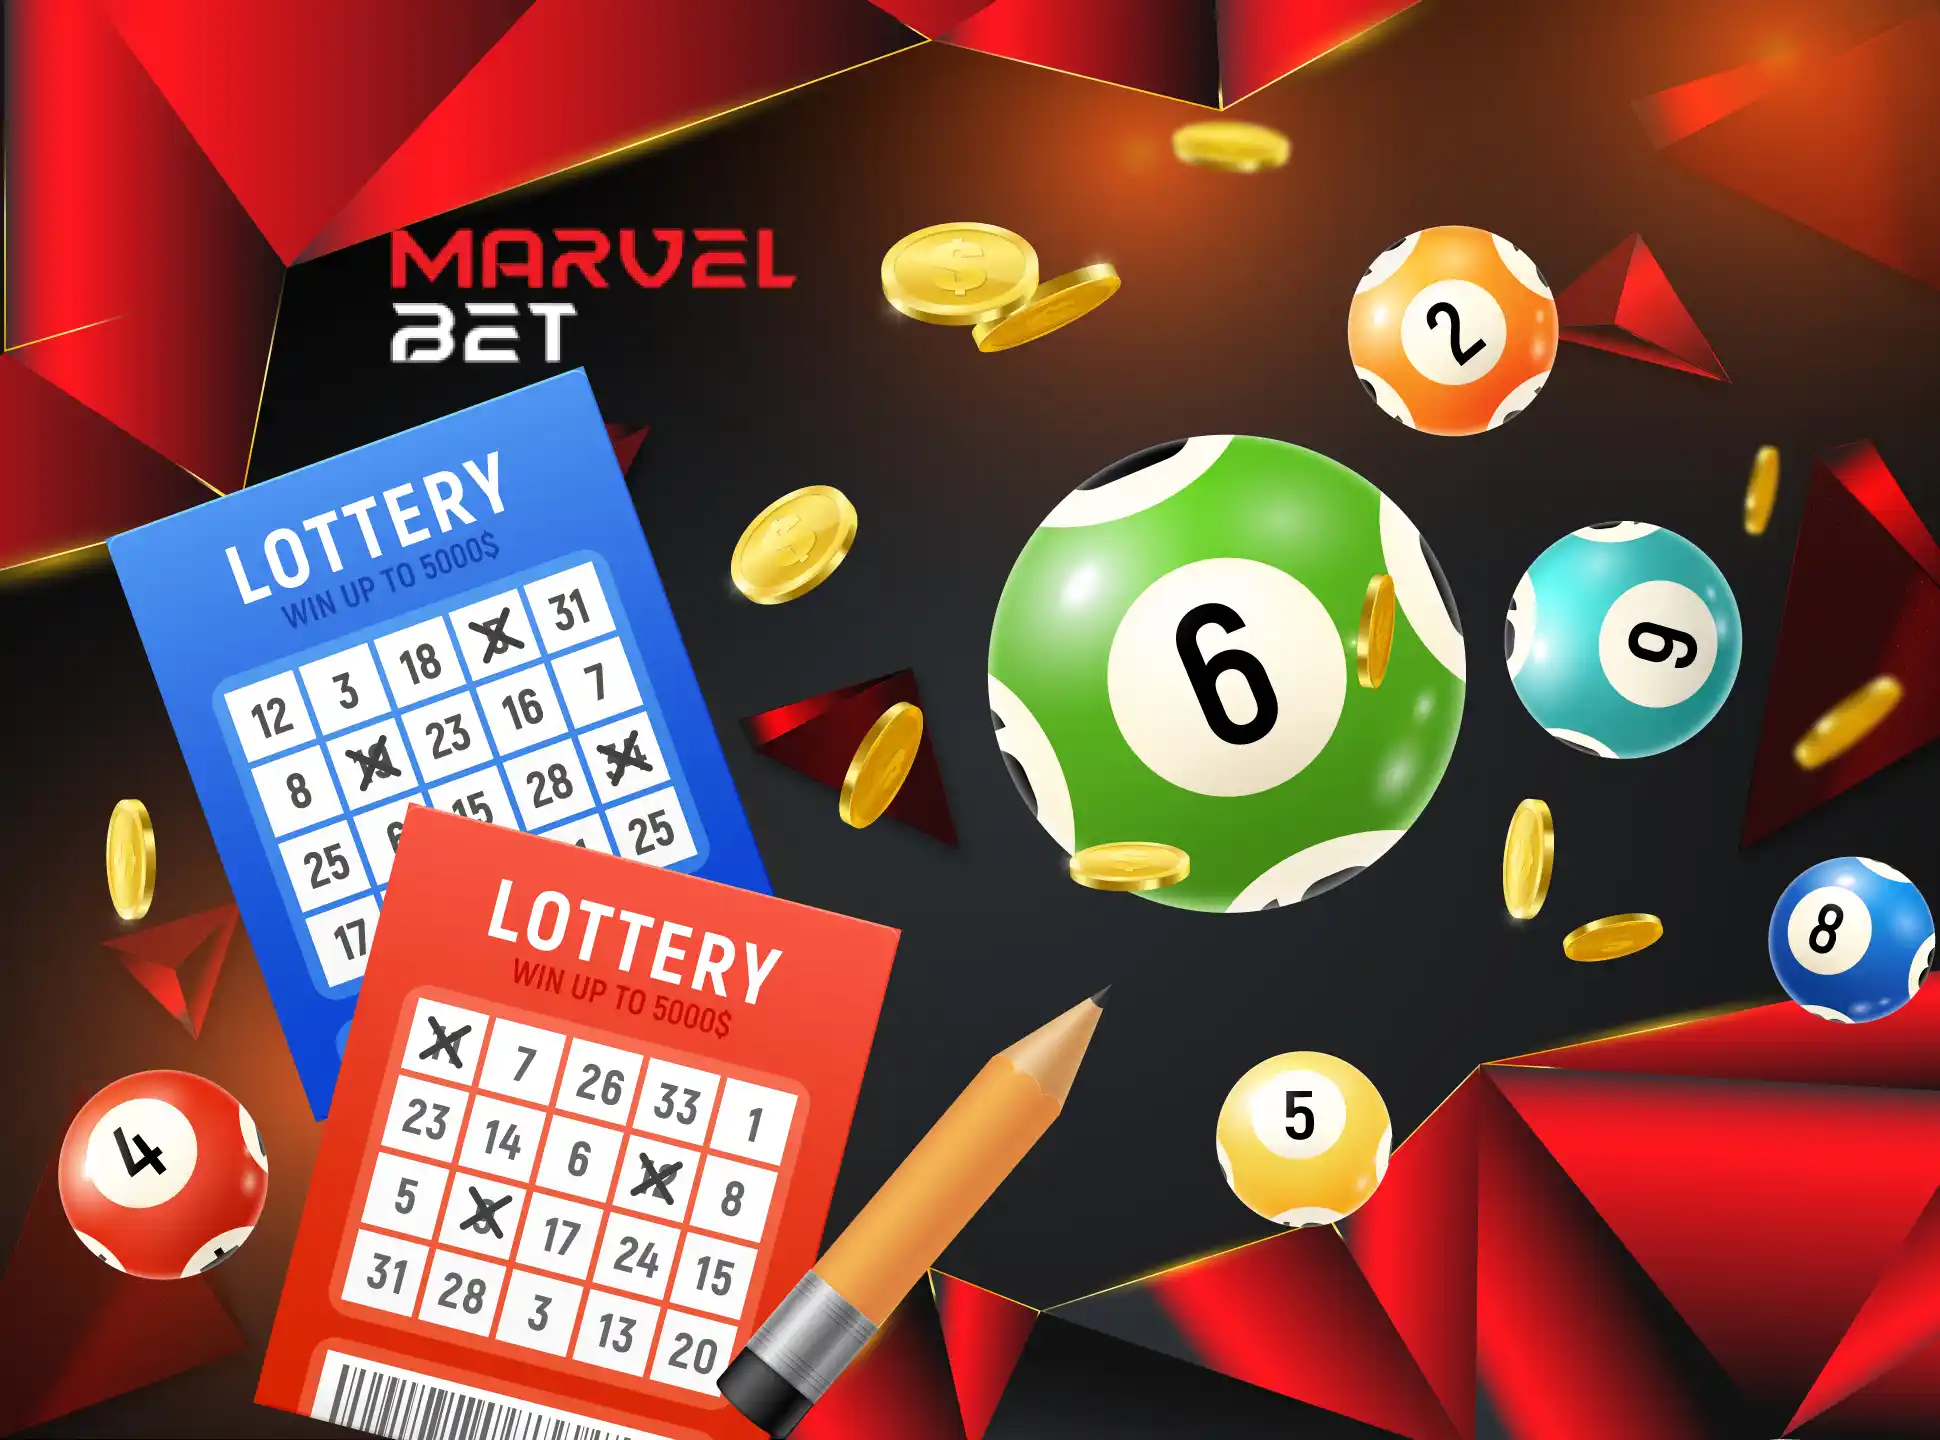 Test your luck and play lottery games at MarvelBet.